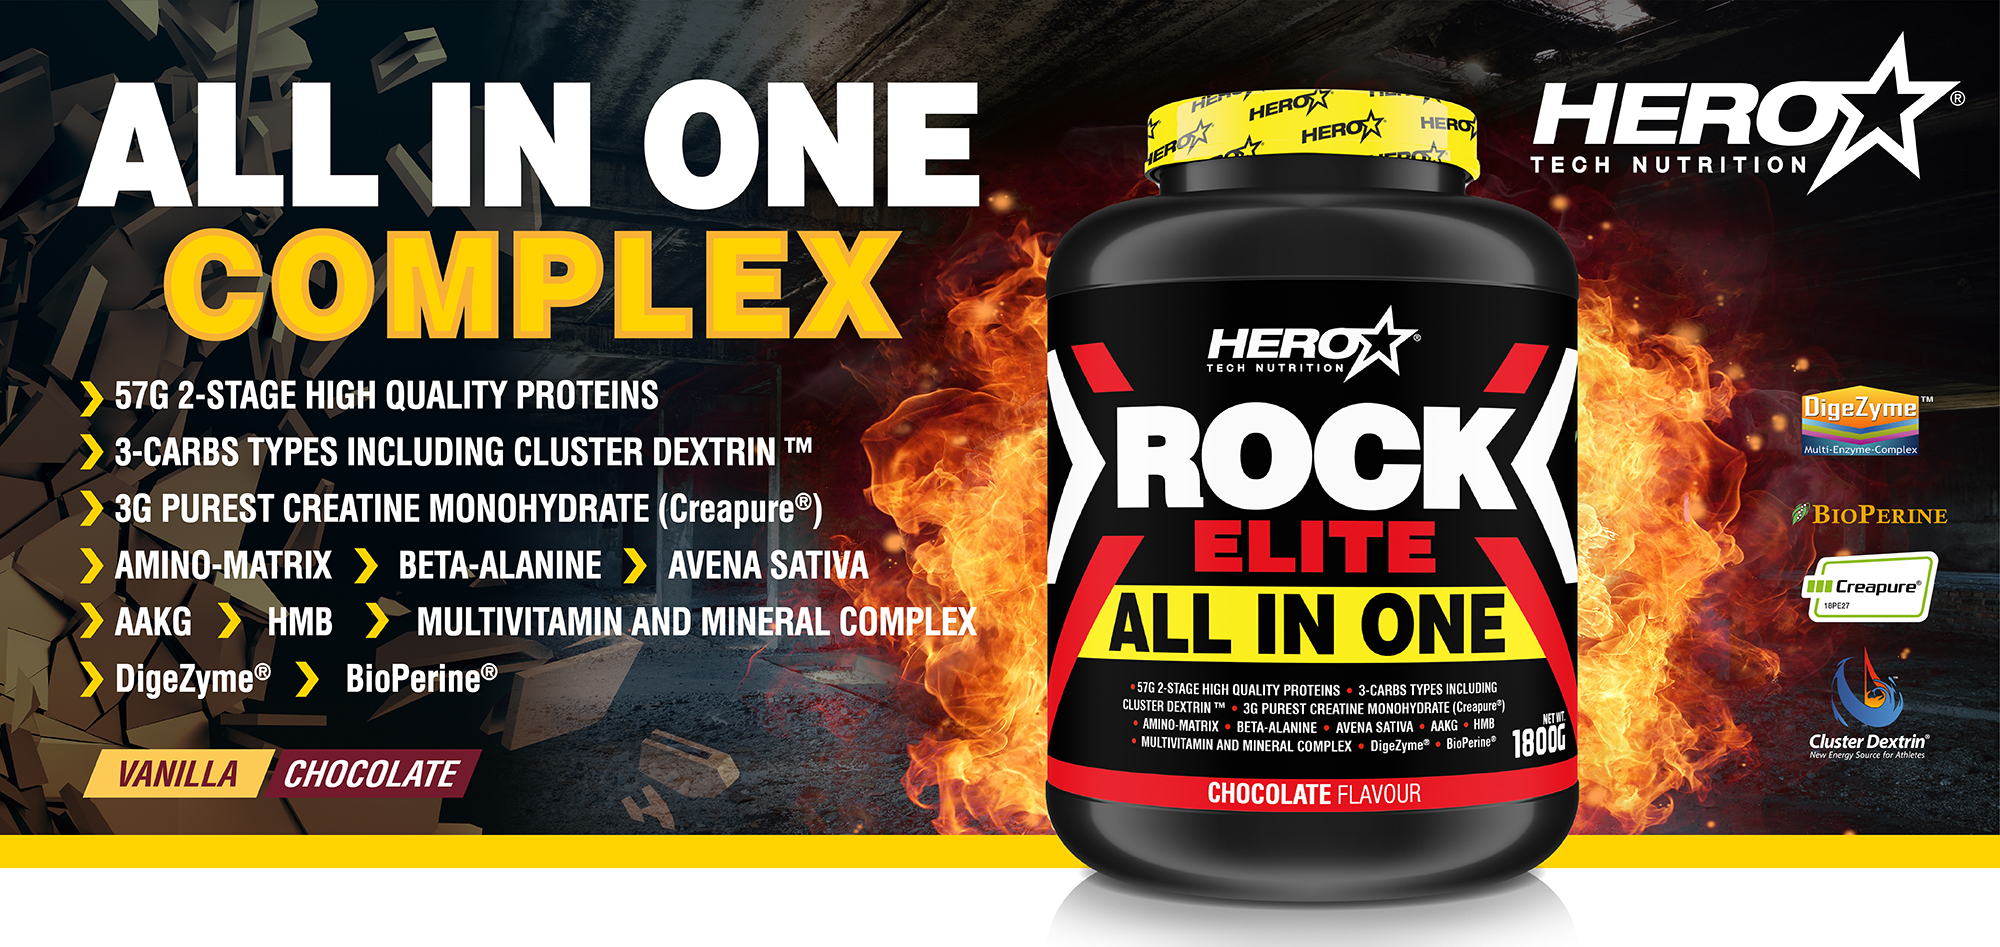 ROCK ELITE ALL IN ONE HERO TECH NUTRITION MUSCLE MASS GROWTH herotechnutrition